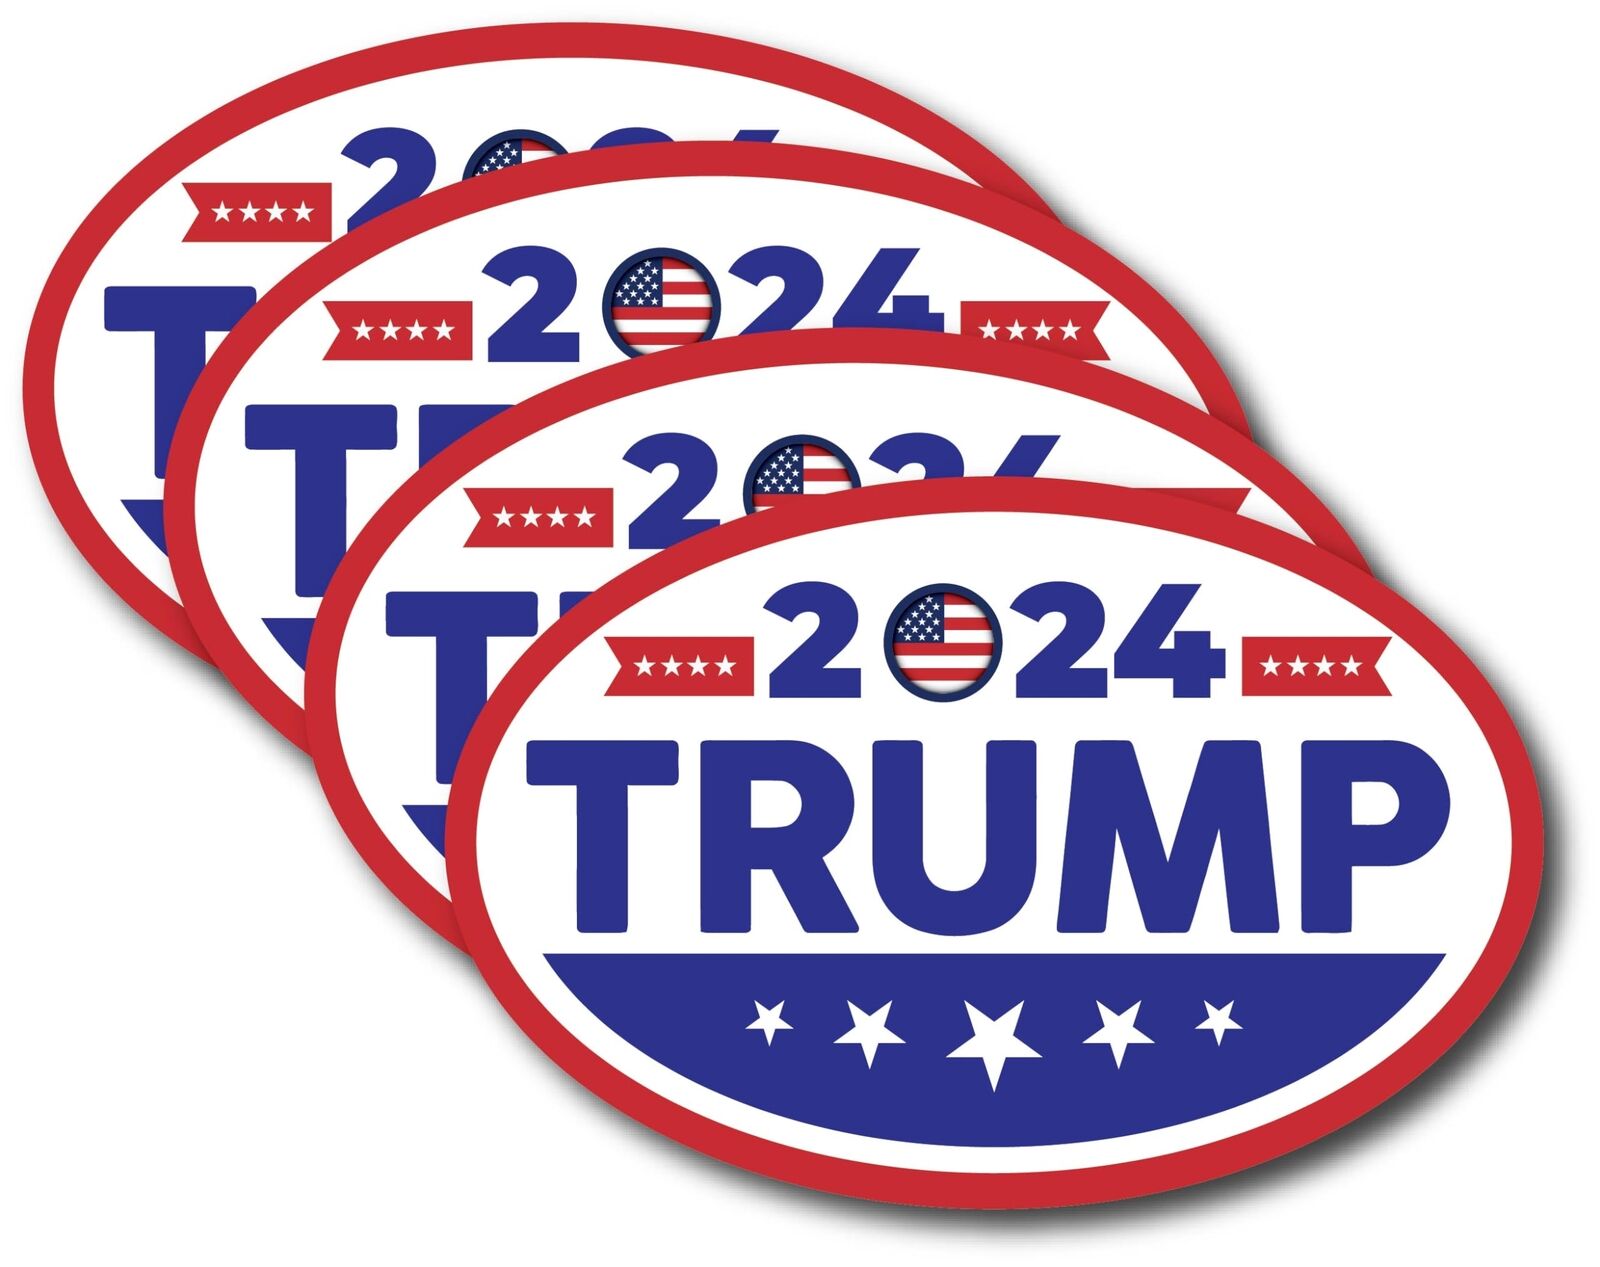 Magnet Me Up Blue Trump 2024 Republican Election Magnet Decal, 4 Pack 4x6 inches